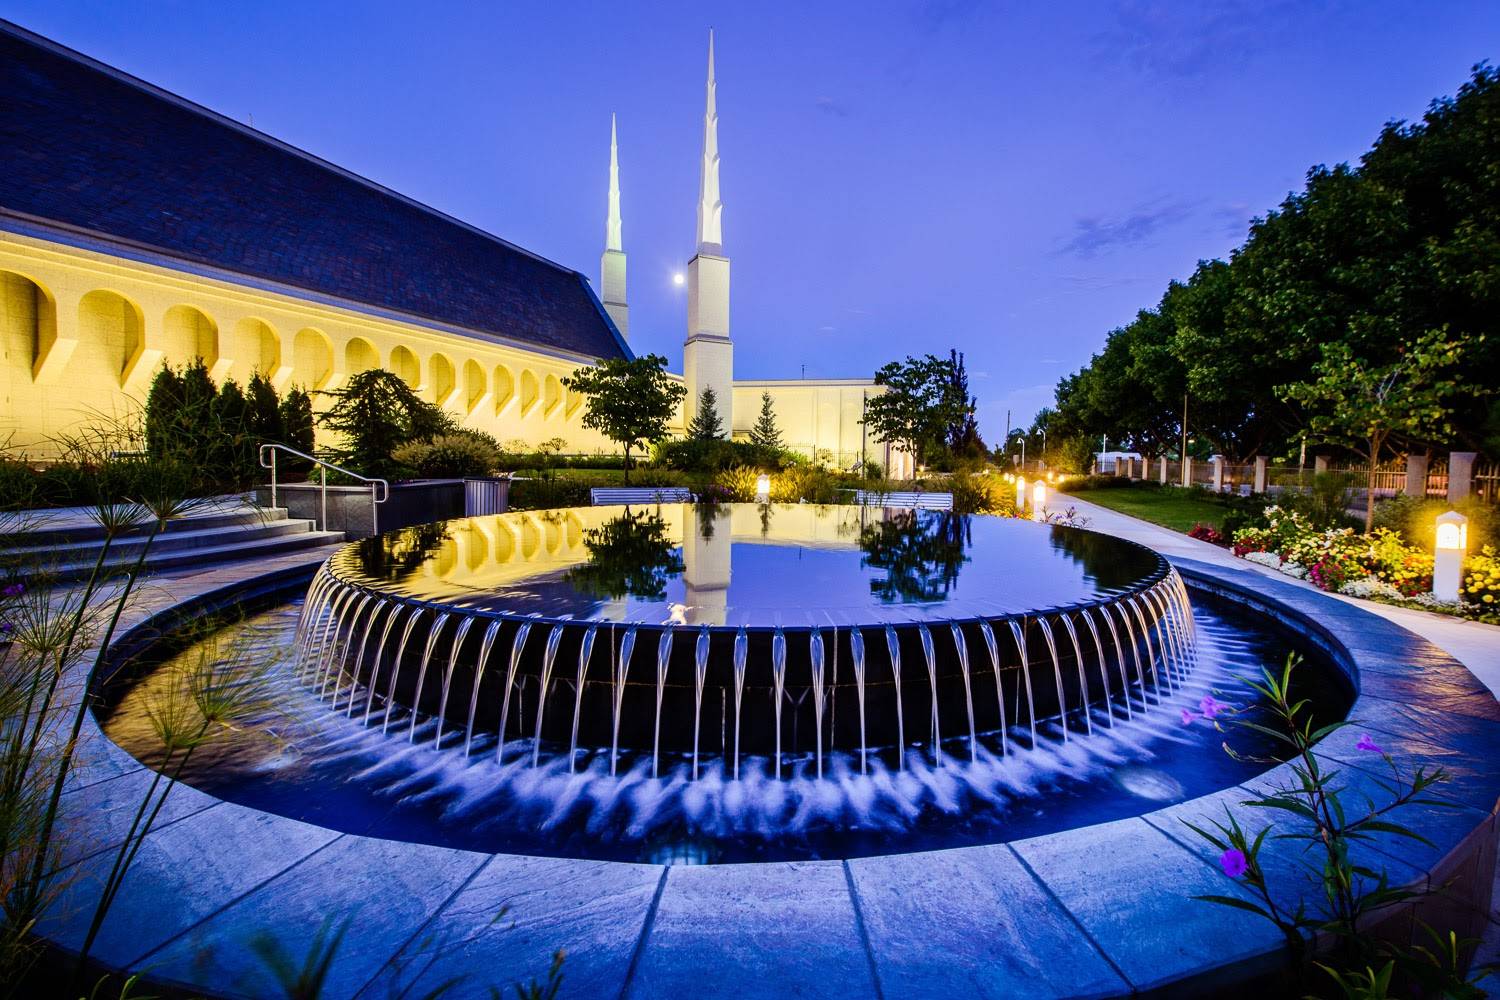 Evening photo of the Boise Temple, featuring the reflection pool fountain. 